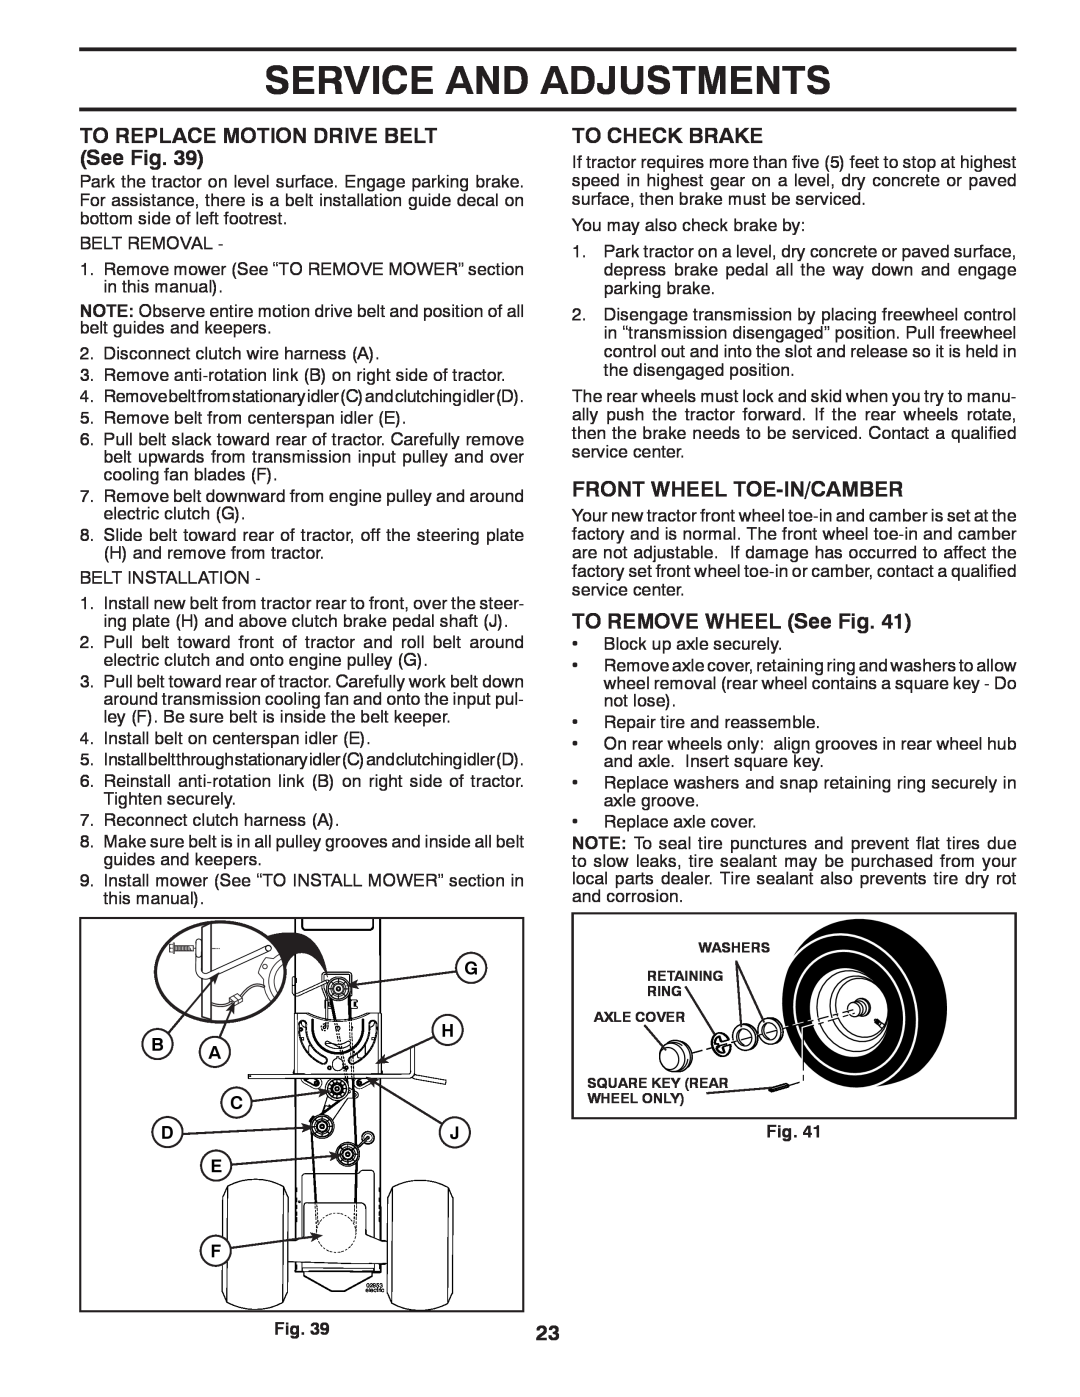 Dixon D25K48YT TO REPLACE MOTION DRIVE BELT See Fig, To Check Brake, Front Wheel Toe-In/Camber, TO REMOVE WHEEL See Fig 